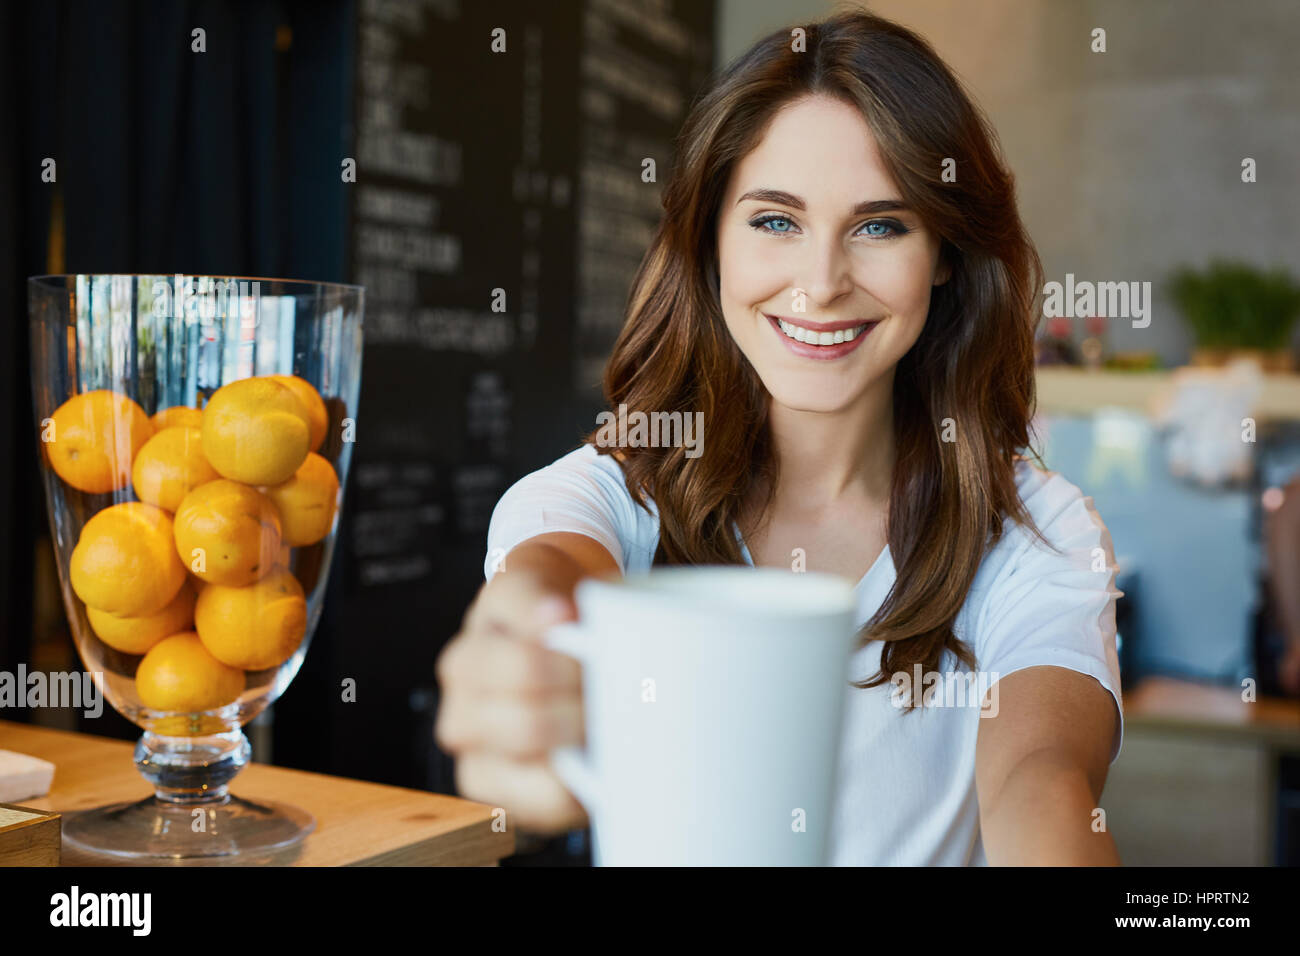 Happy, young woman serving coffee in cafe Stock Photo